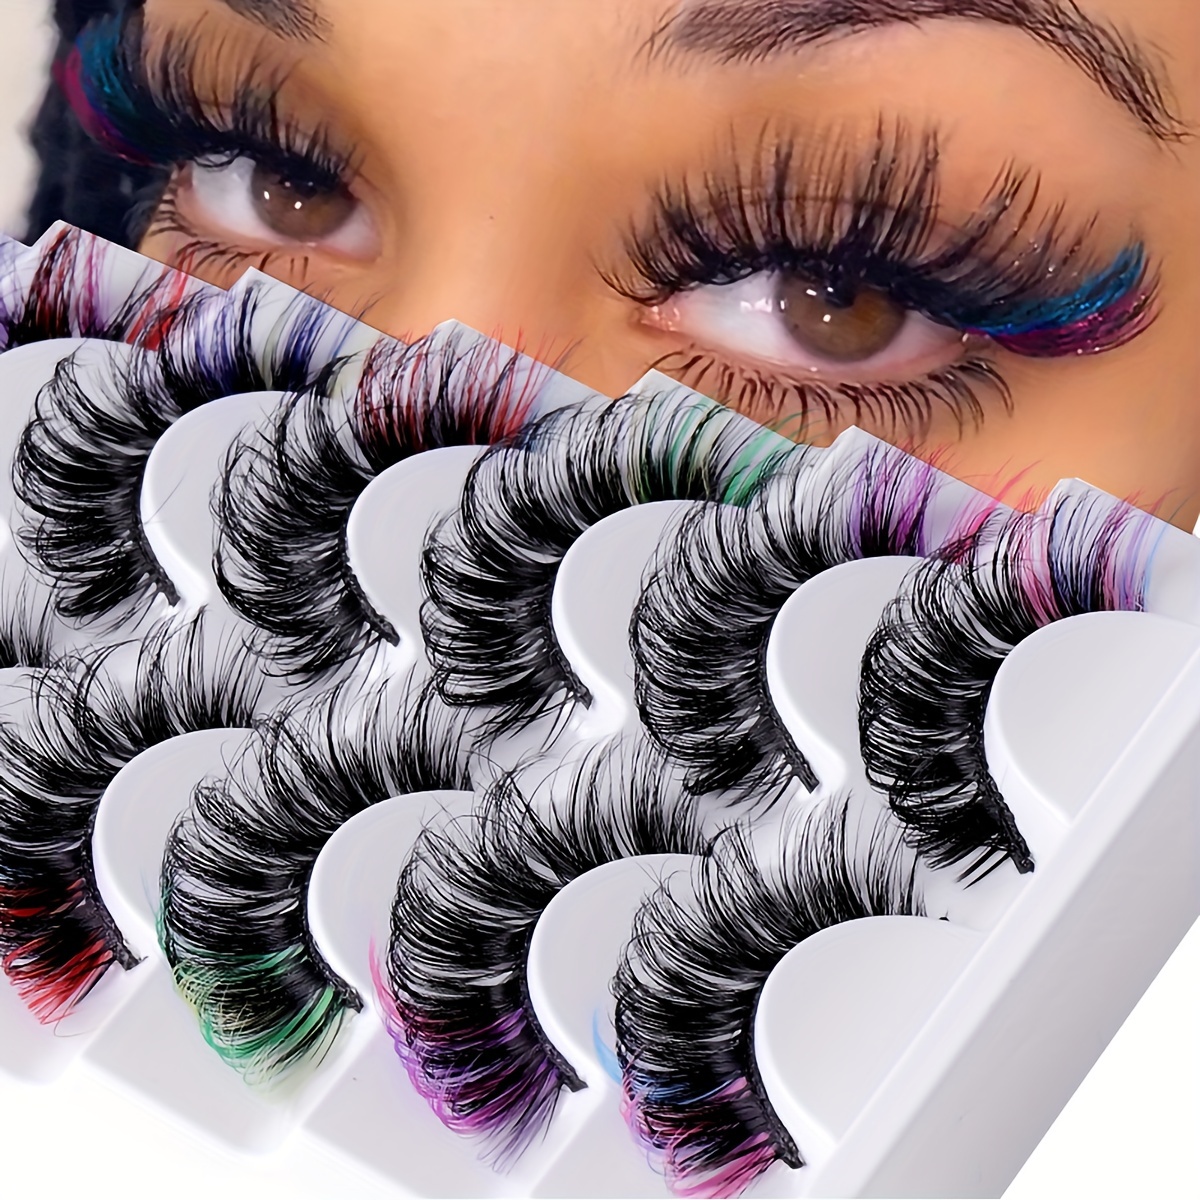 

7 Pairs Colorful 3d False Eyelashes Dd Fluffy Faux Mink Lashes With Color Russian Volume Natural Thick Curly Lashes Extension For Daily Party Festival Stage Makeup Use